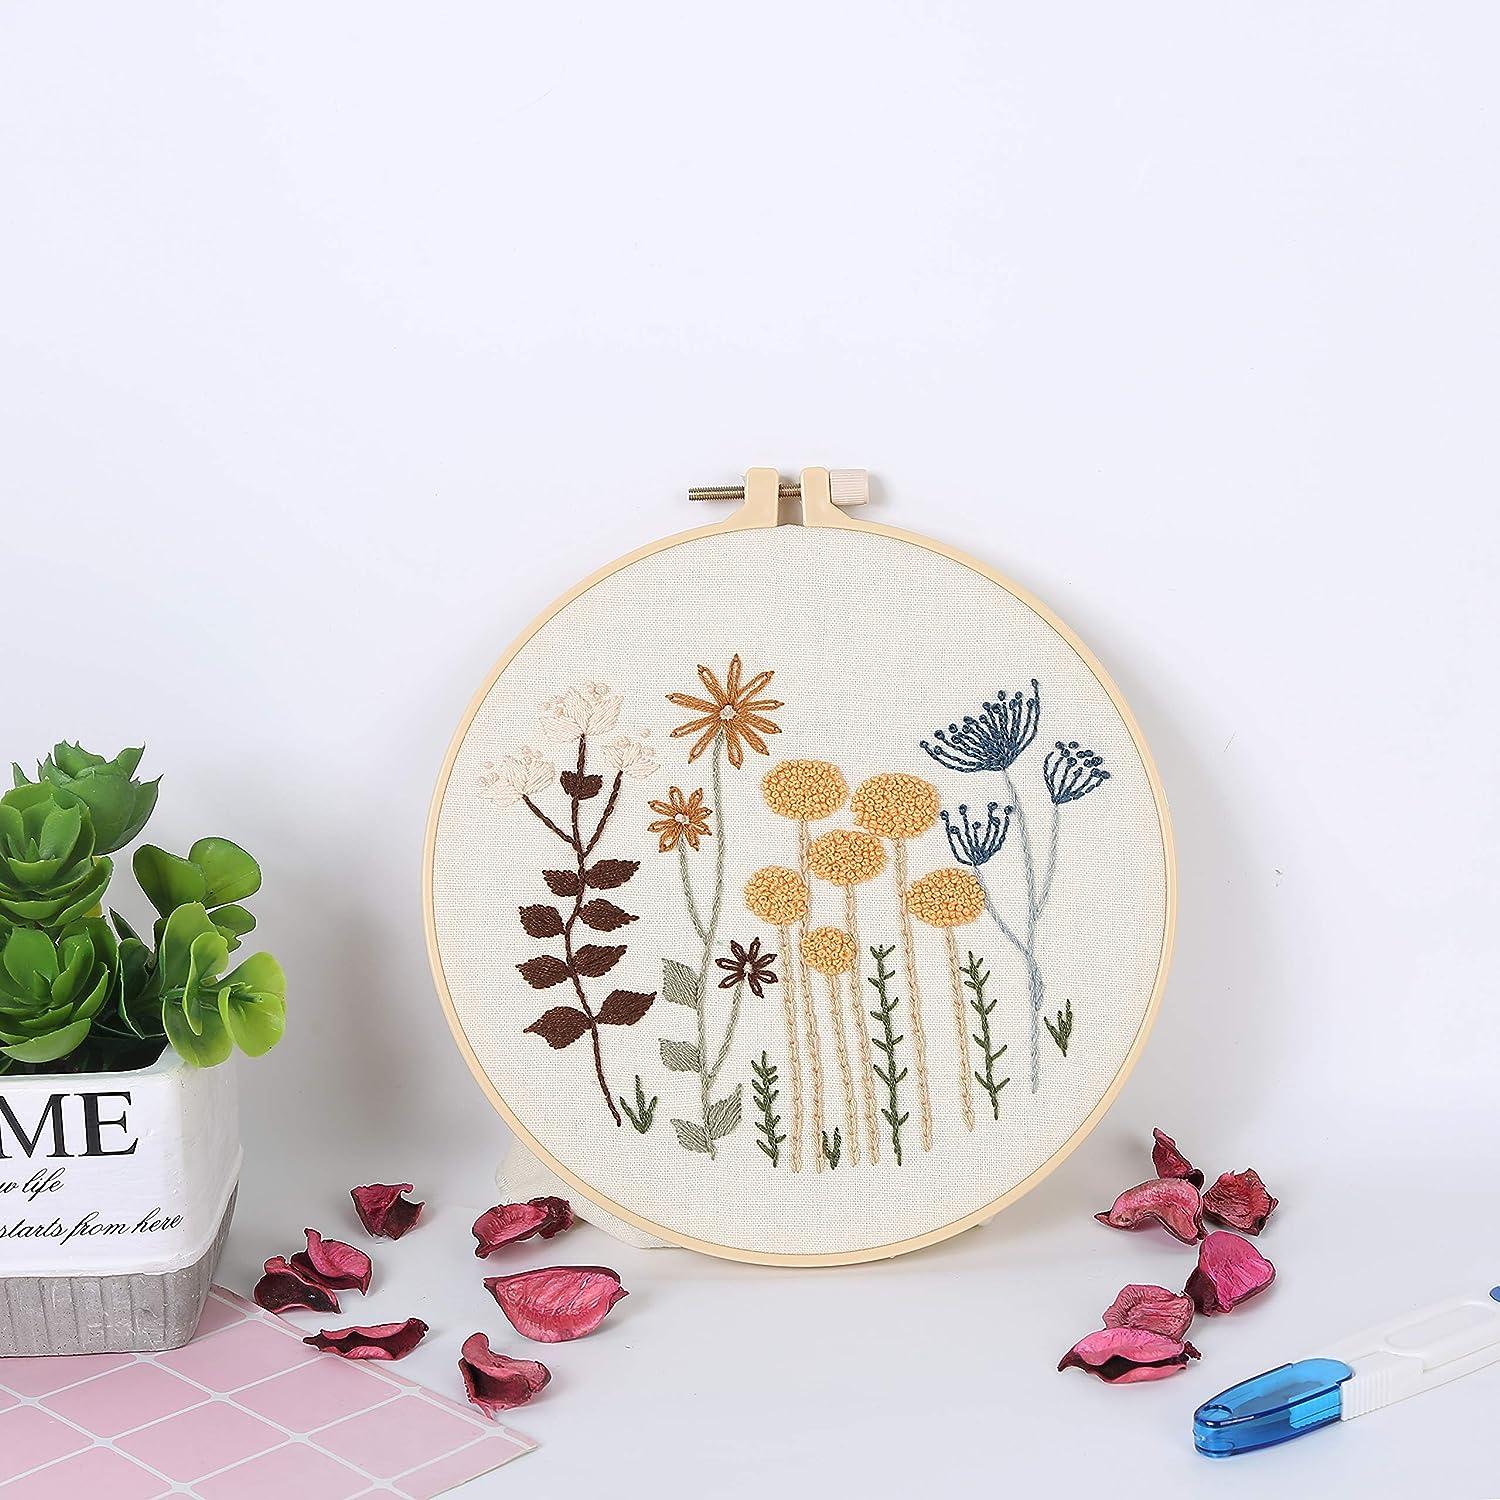 Embroidery kit for Adults Beginners with Embroidery Pattern Needlepoint Kits  for Beginner Ideal Hand Embroidery kit to Learn - AliExpress